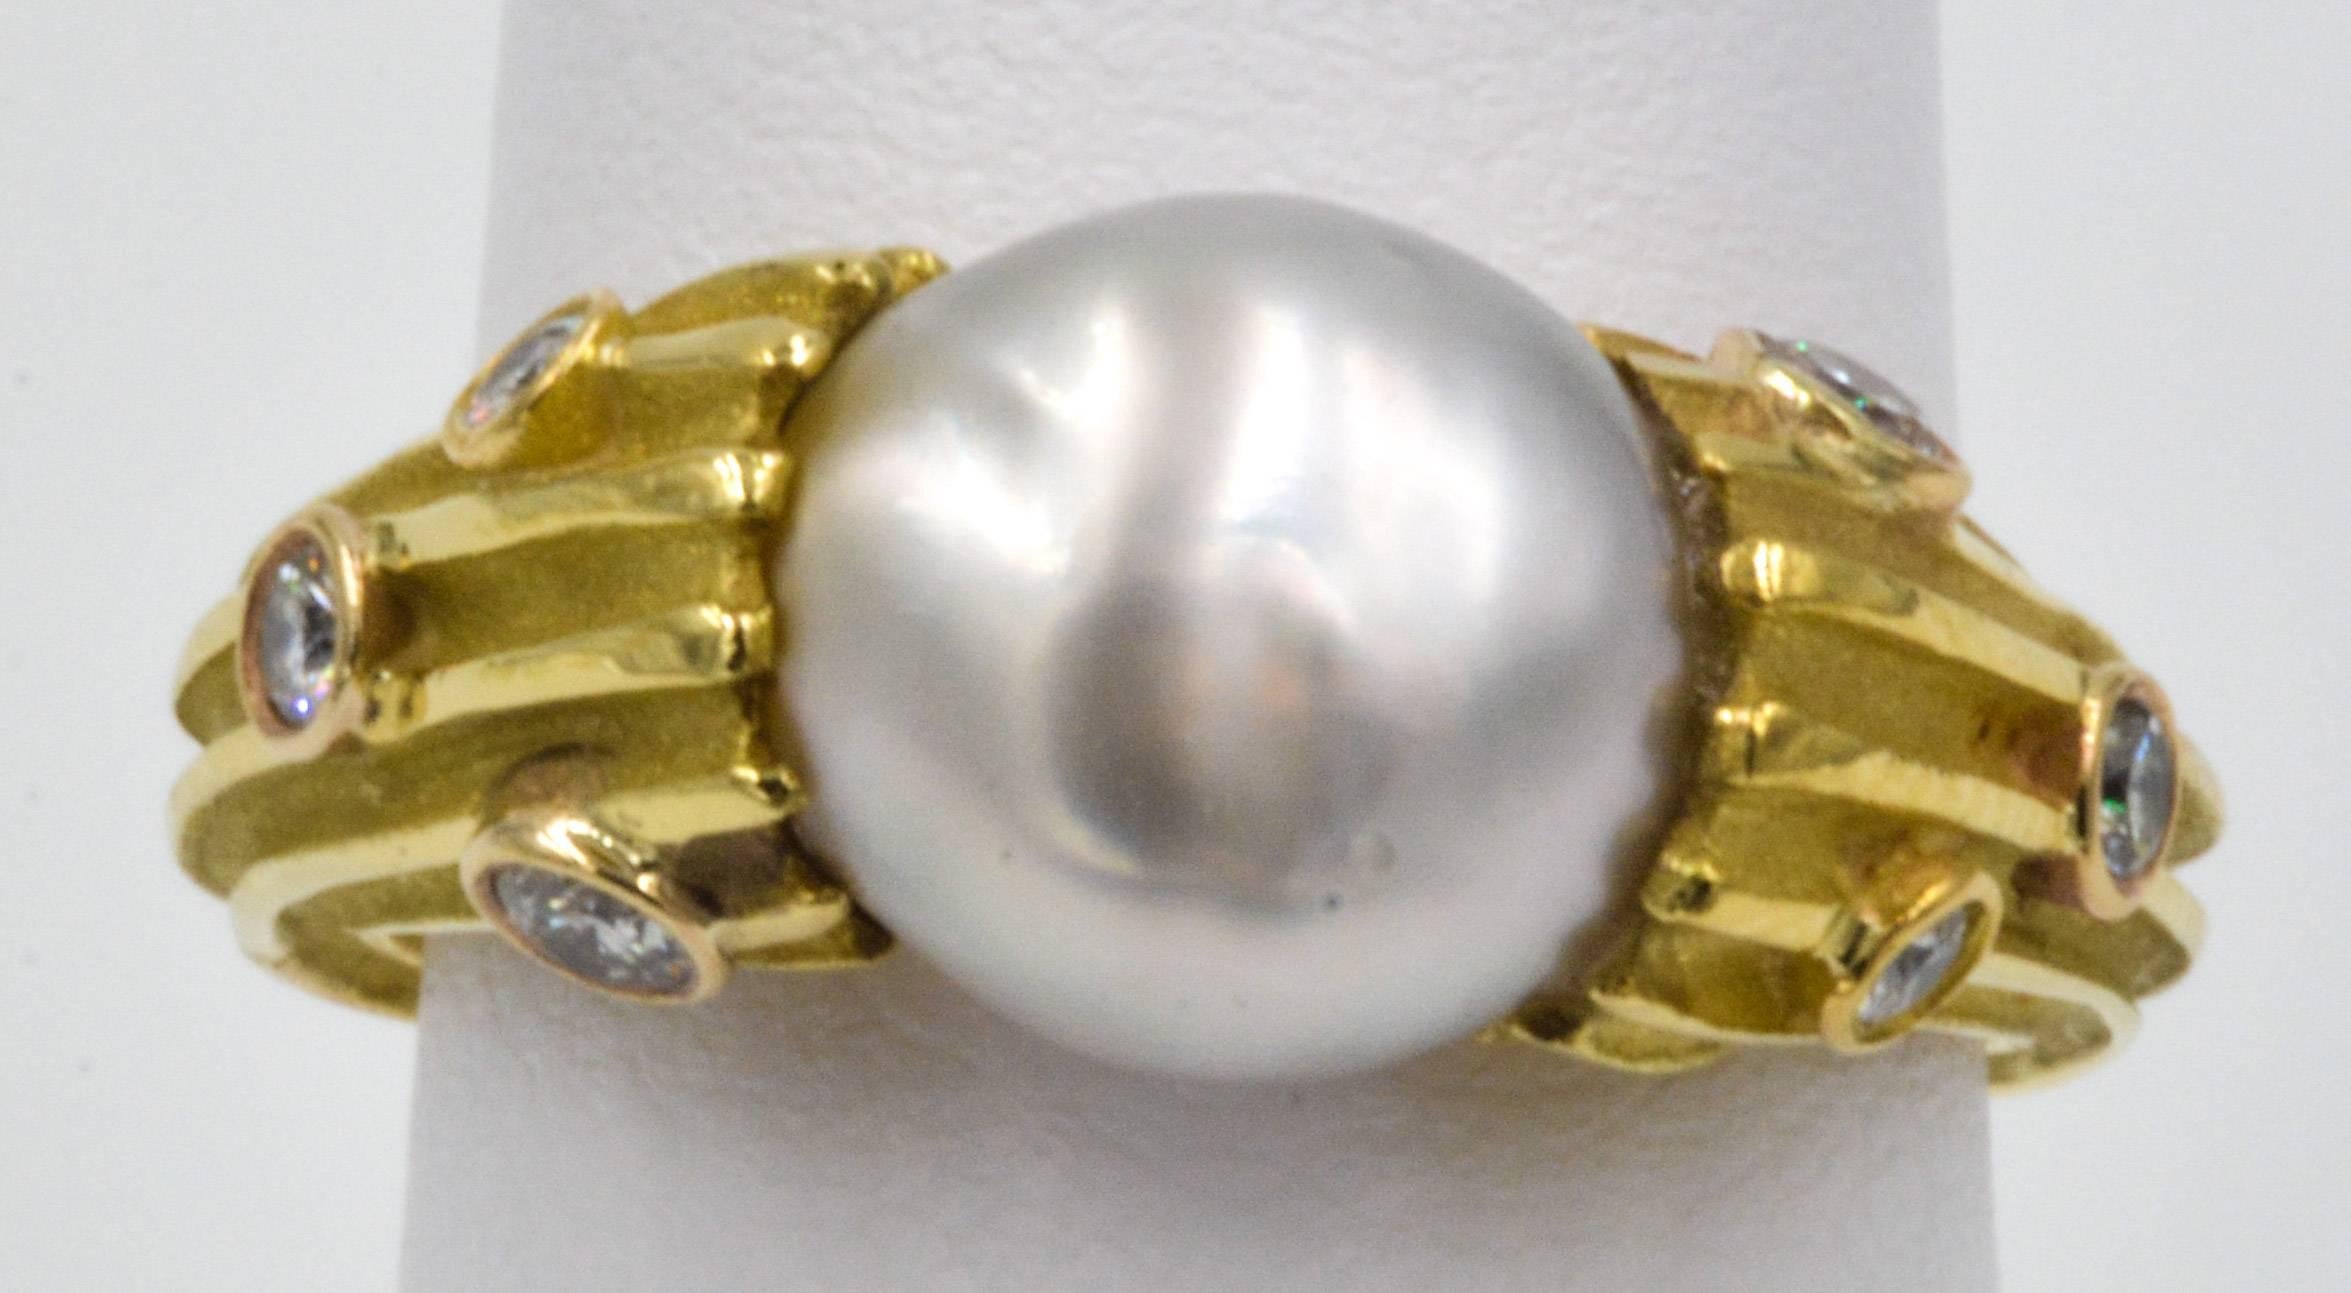 This classic 18kt yellow gold Christopher Walling ring is centered with a baroque pearl that measure 8-9 mm in diameter and is designed with multiple grooves cut in the shank that are high polished on the high spots and satin finished inside the